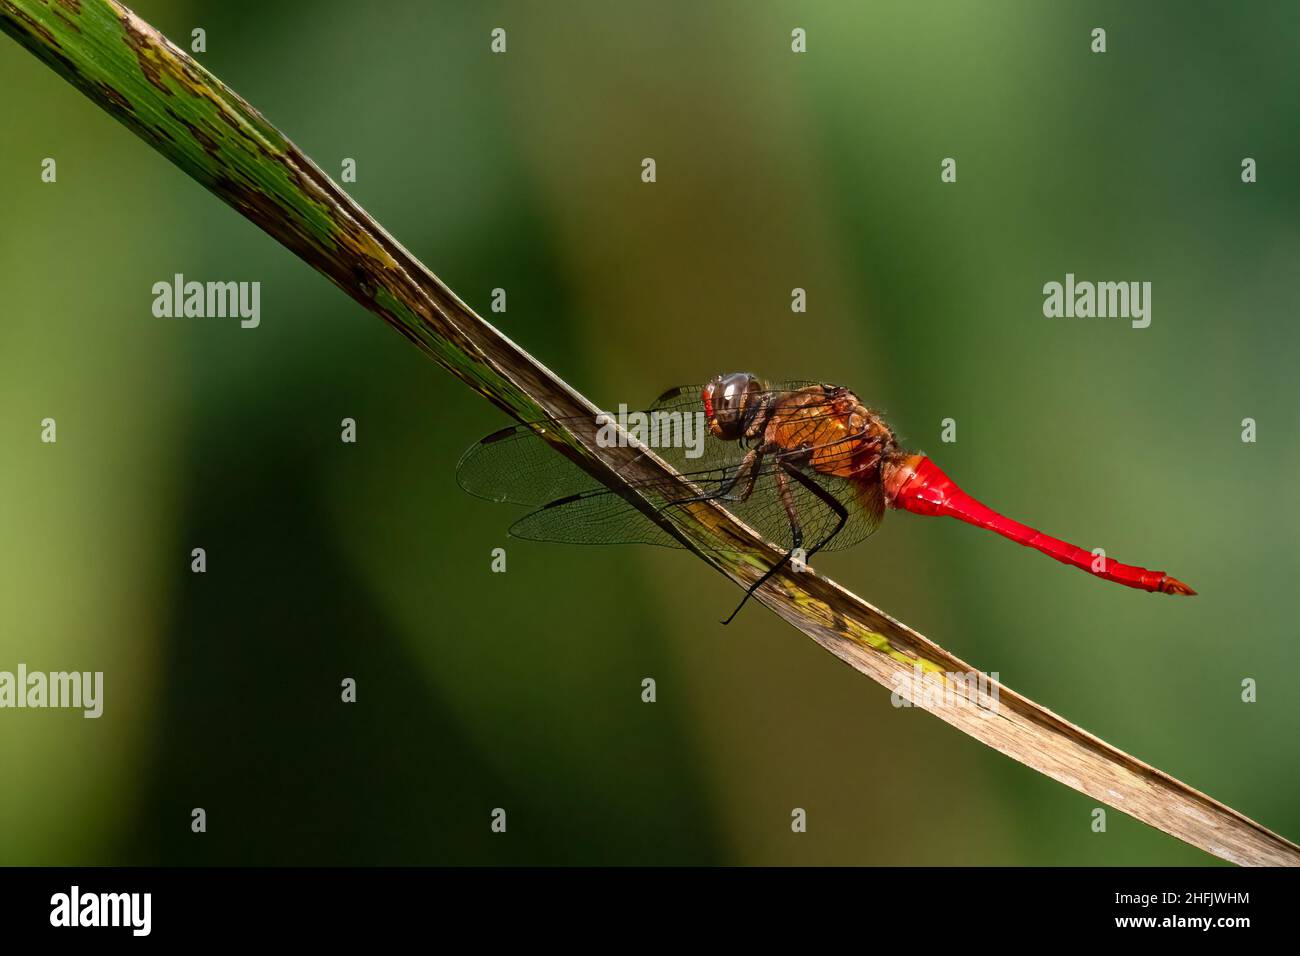 Colorful Greater Red Skimmer dragonfly perching on grass leaf with green blur background Stock Photo